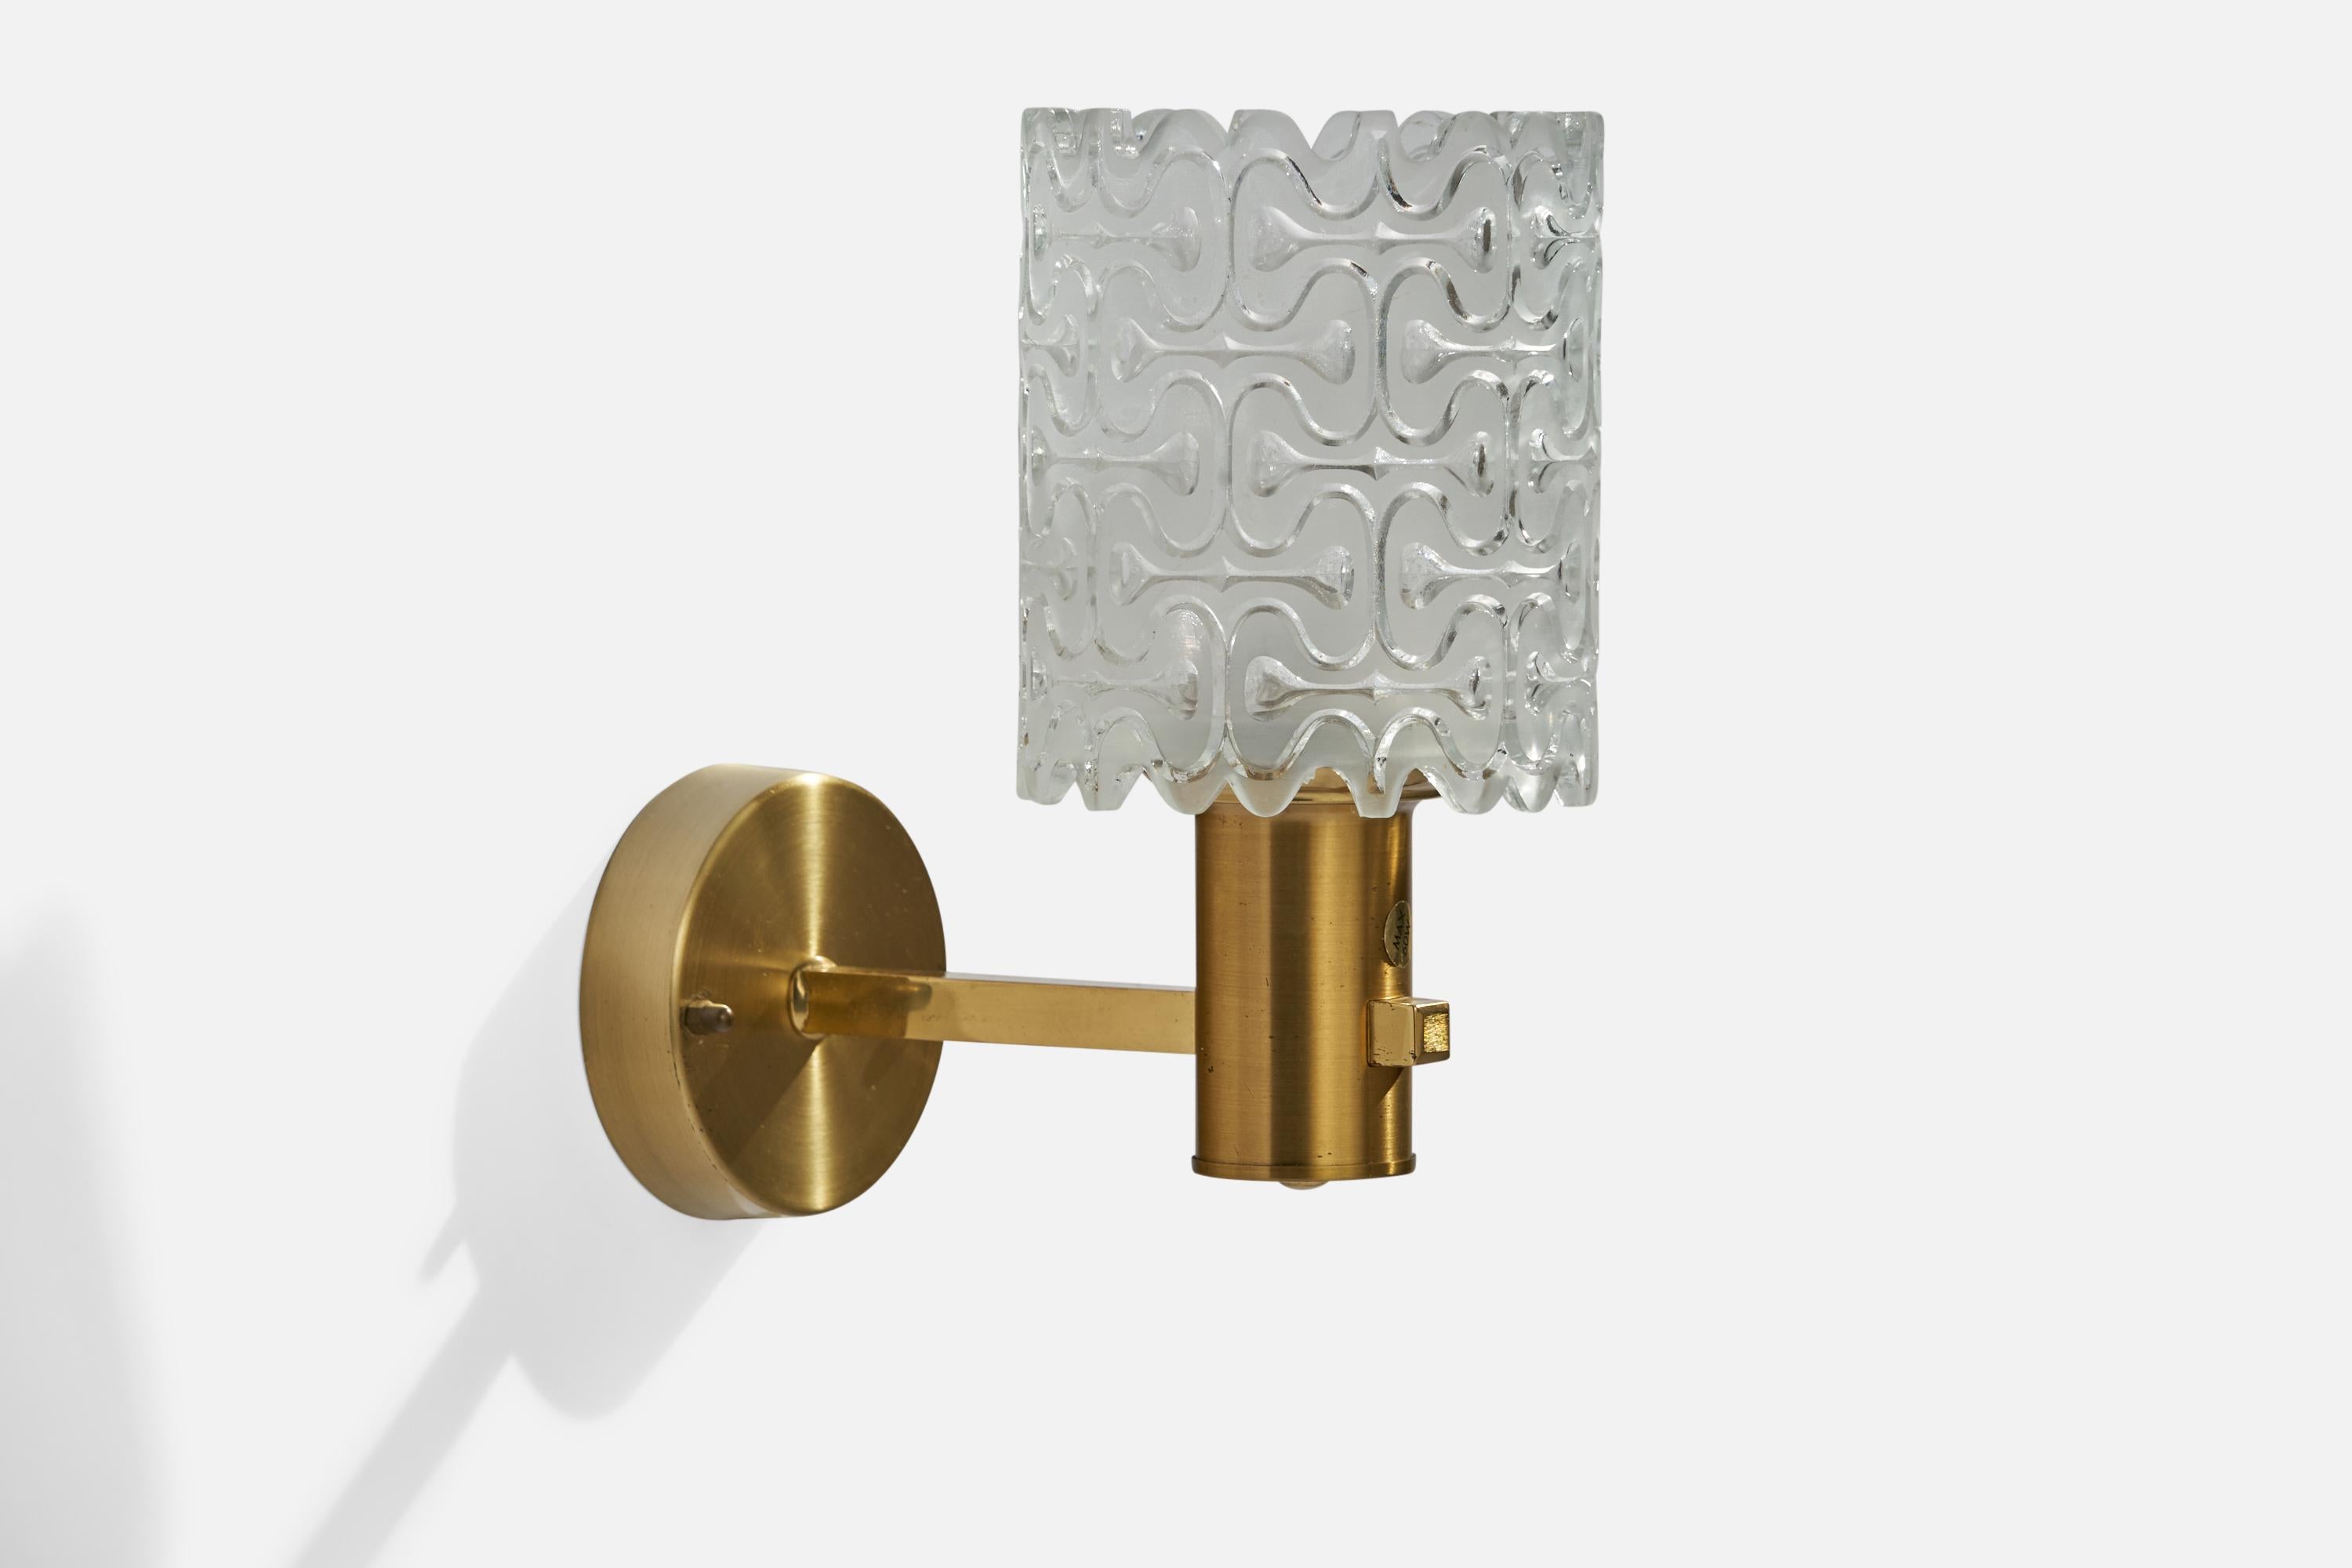 A brass and glass wall light designed and produced by EWÅ Värnamo, Sweden, c. 1960s.

Overall Dimensions (inches): 9” H x 4.25” W x 8”  D
Back Plate Dimensions (inches): 3.5”  H x 3.5” W x .75” D
Bulb Specifications: E-26 Bulb
Number of Sockets: